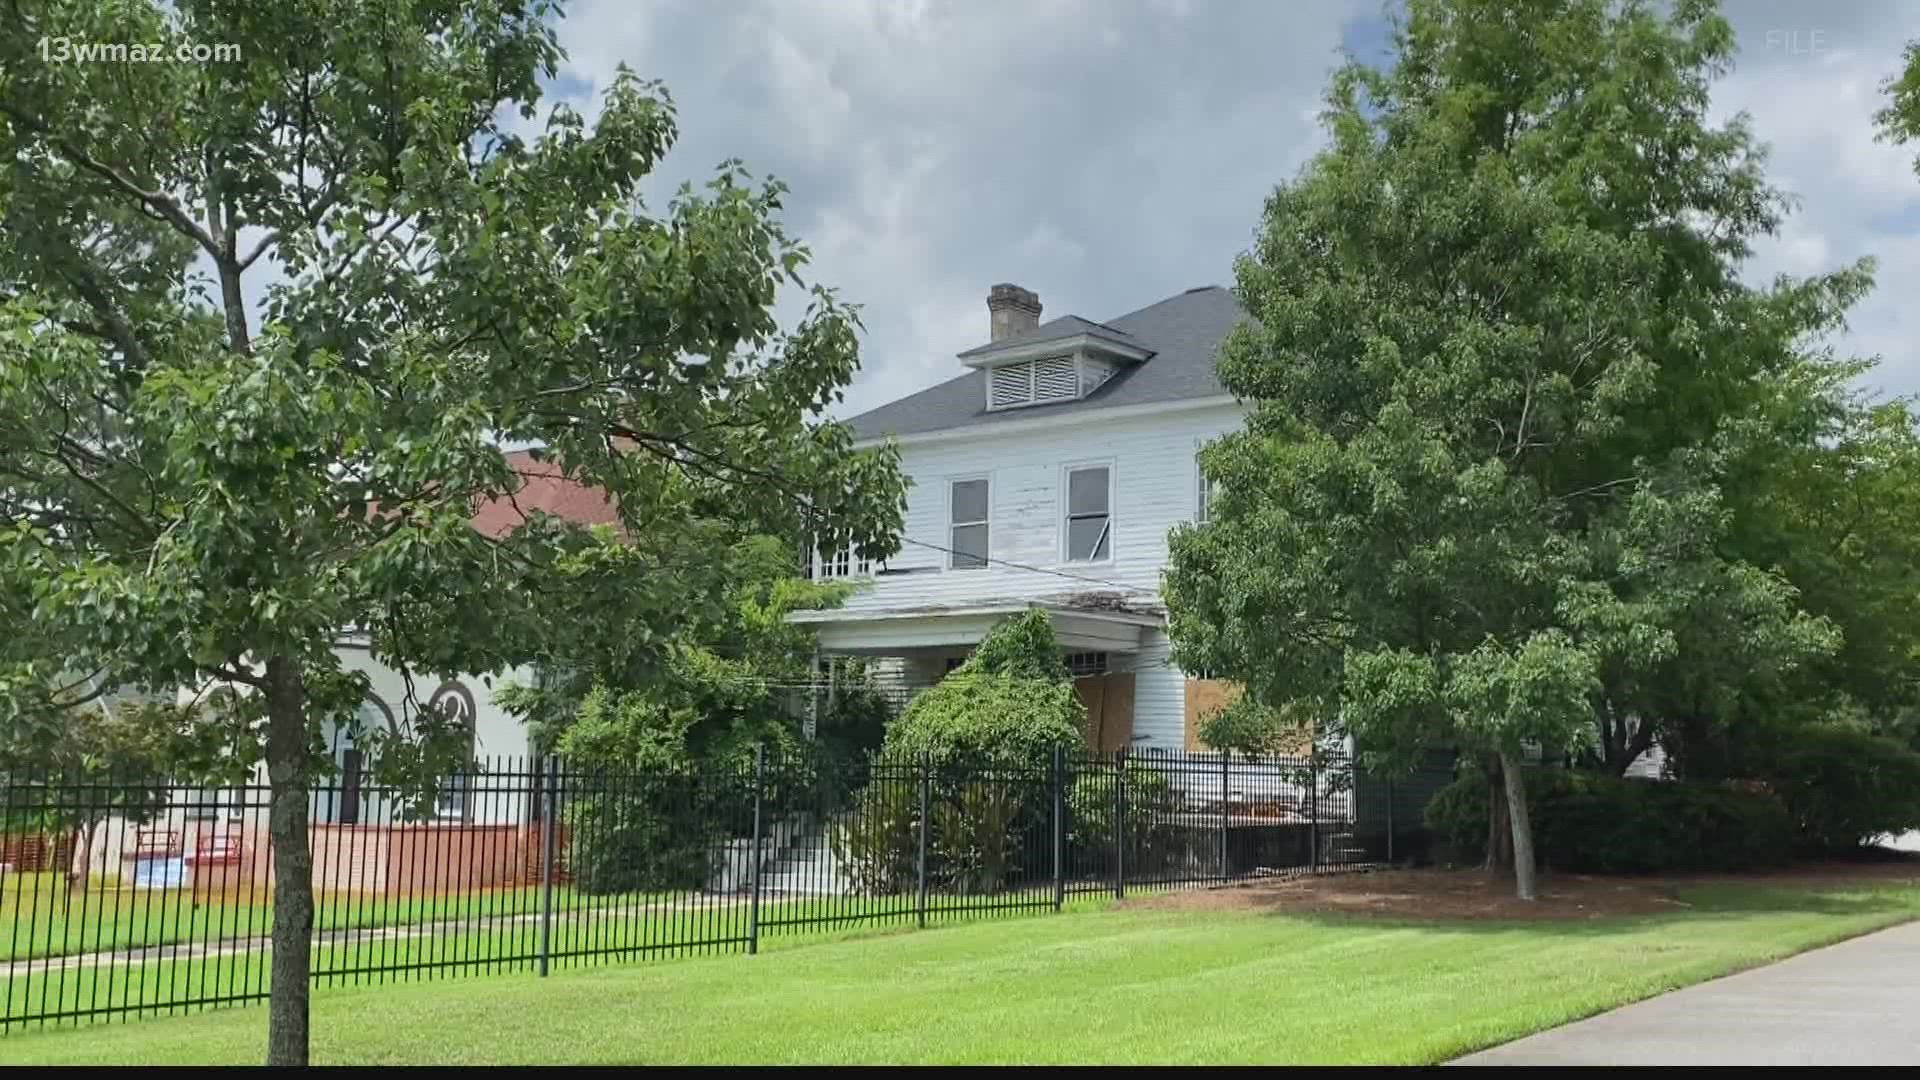 Some in the neighborhood say the home at 2353 Vineville once belonged to the first woman to receive a bachelor's from an accredited university.